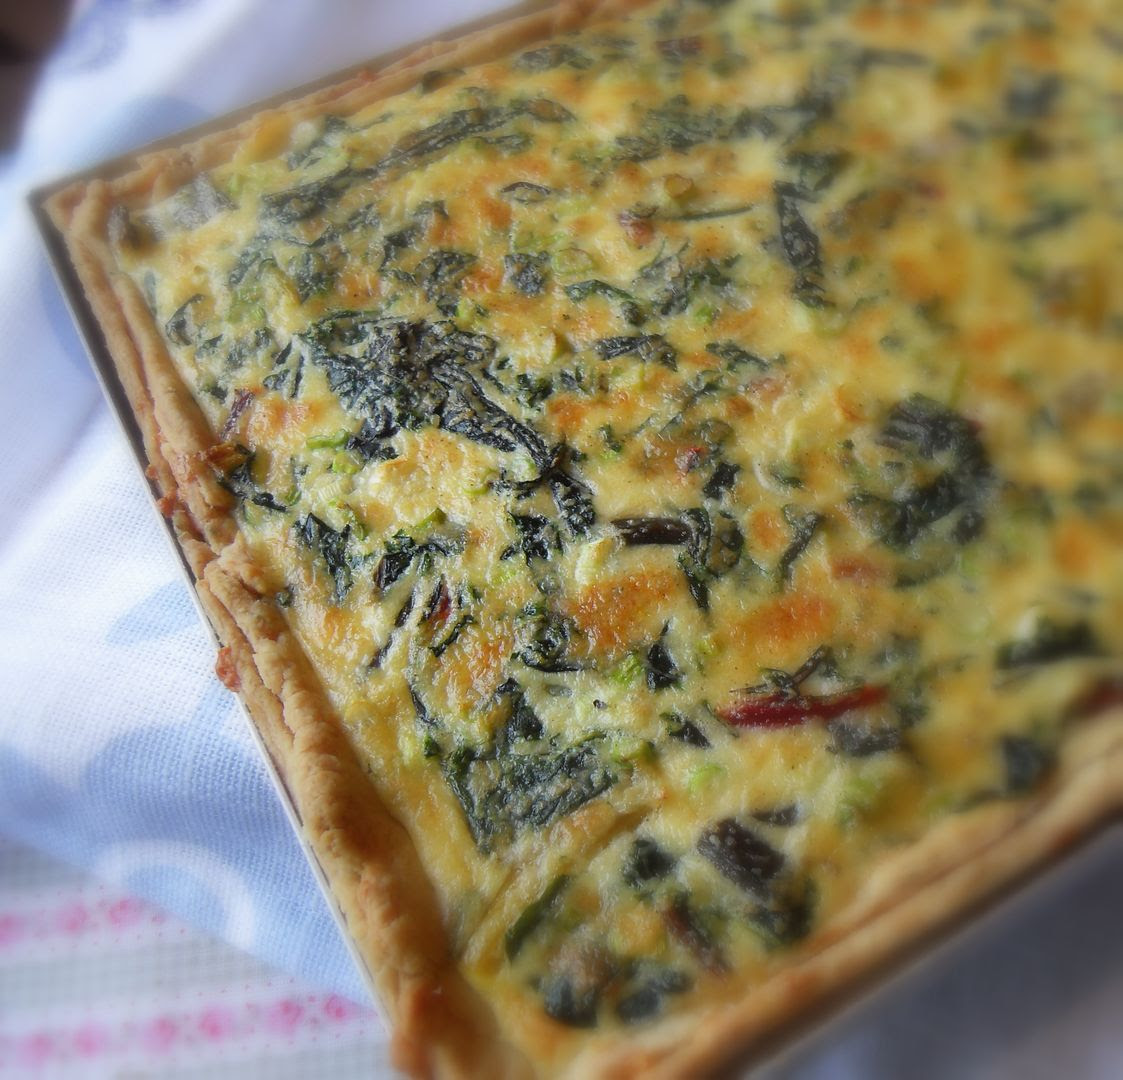 The English Kitchen: A Scrummy Tart of Chard and Cheese